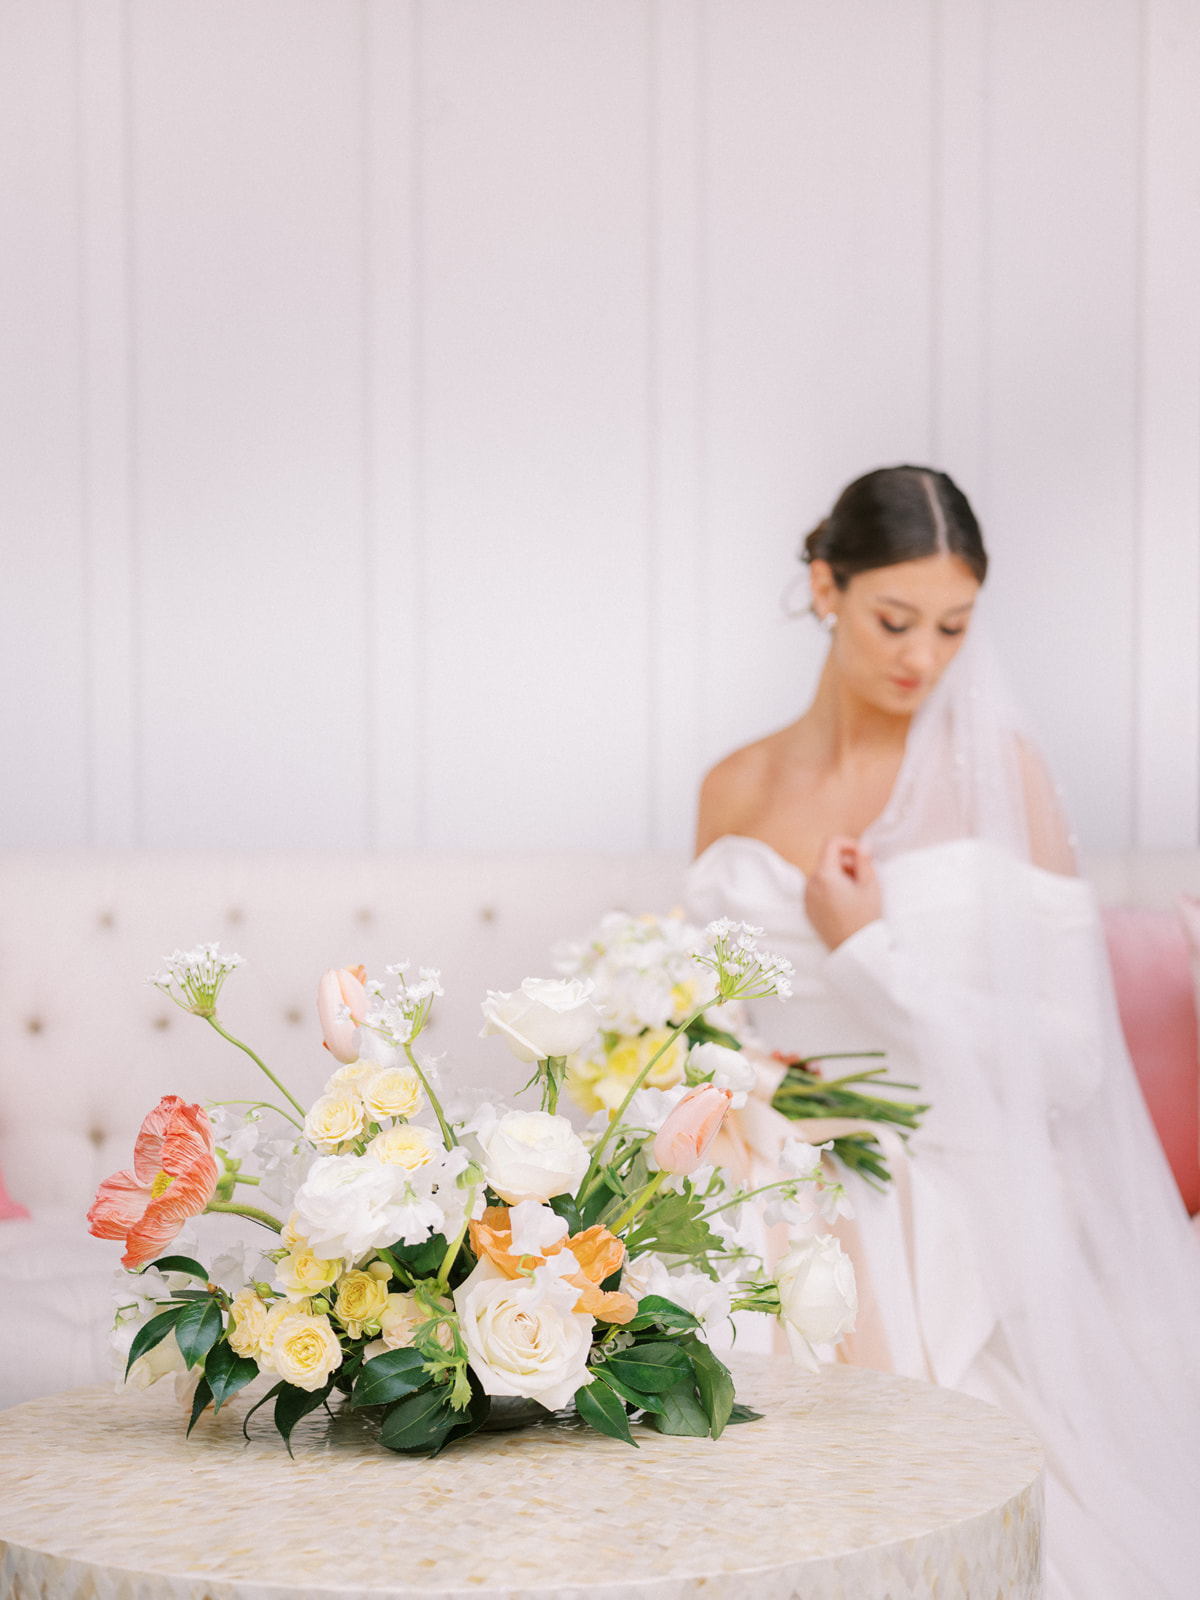 Soft romantic florals for a timeless wedding in Orlando, Florida photographed by Juliana Kae